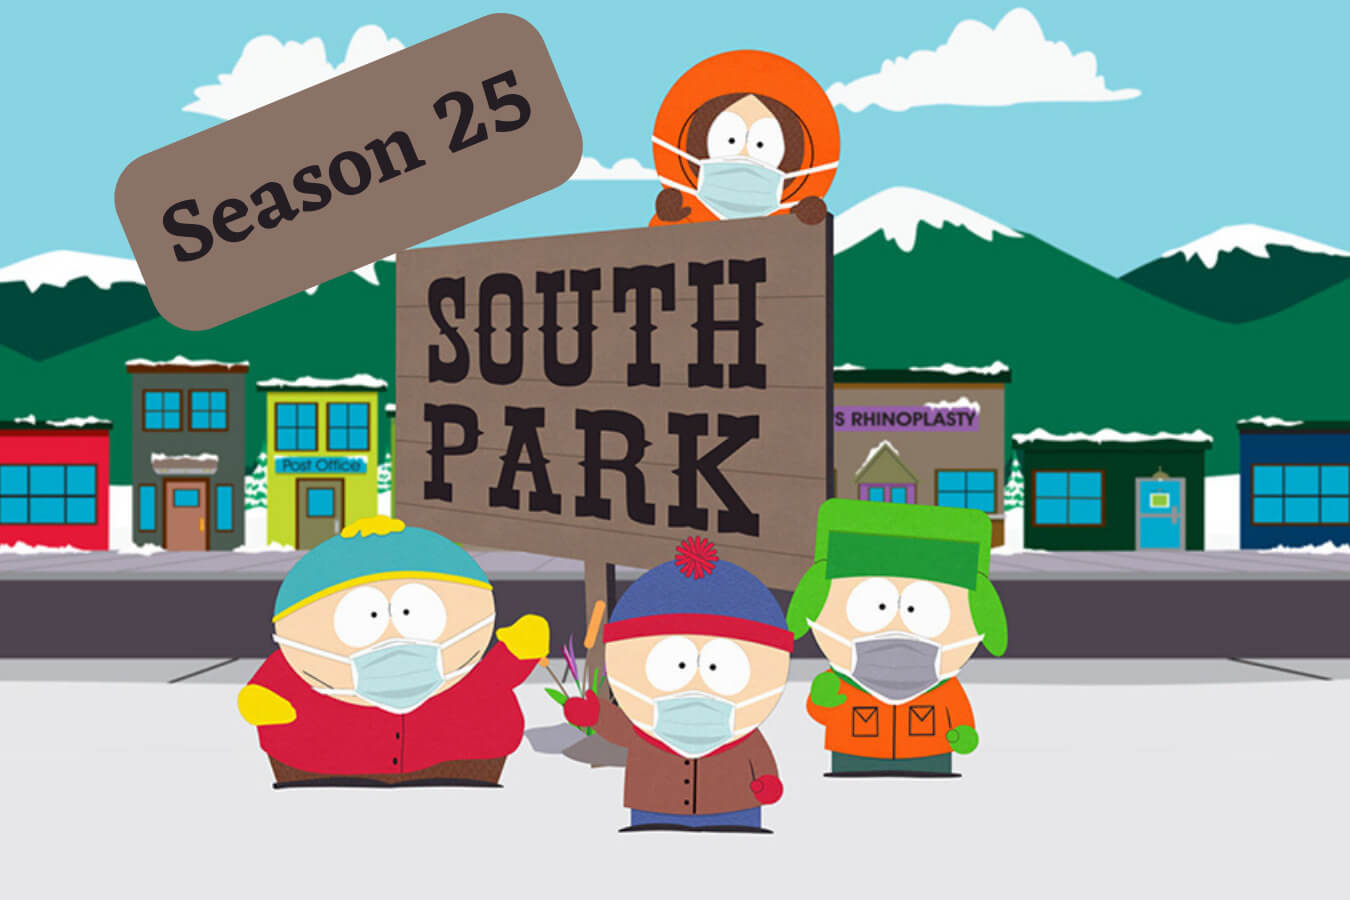 Is There Any News South Park season 25 Trailer?